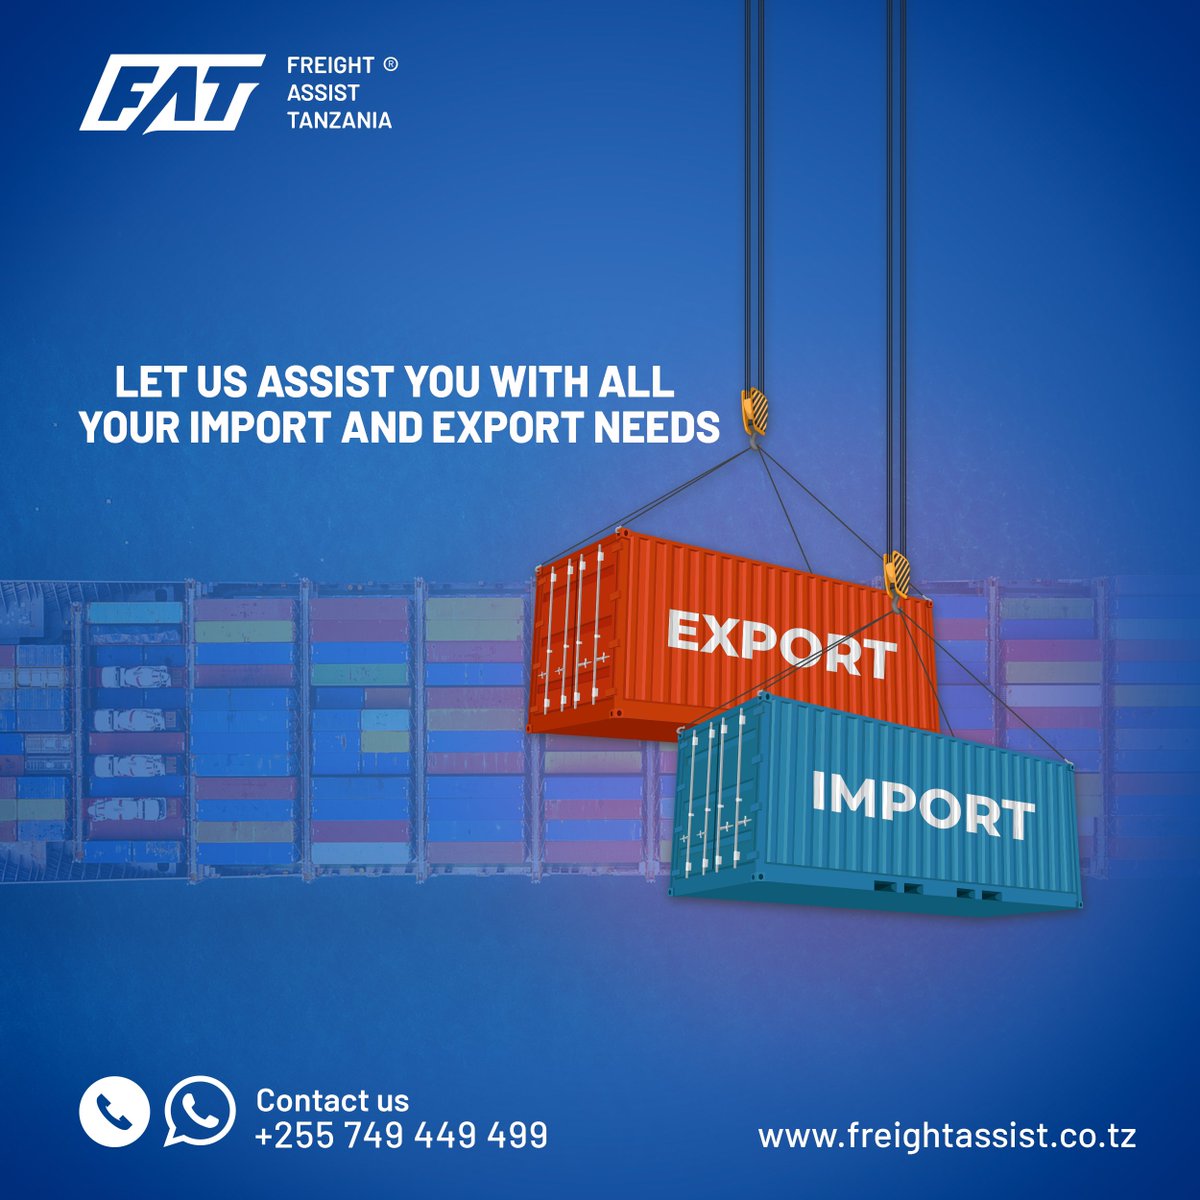 Streamline your global trade with our comprehensive import and export solutions. Let us handle the logistics while you focus on growing your business.

#FreightAssistTanzania #FreightFowarding #Shipping #AirFreight #SeaFreight #FreightForwarder #SupplyChain #Export #Import